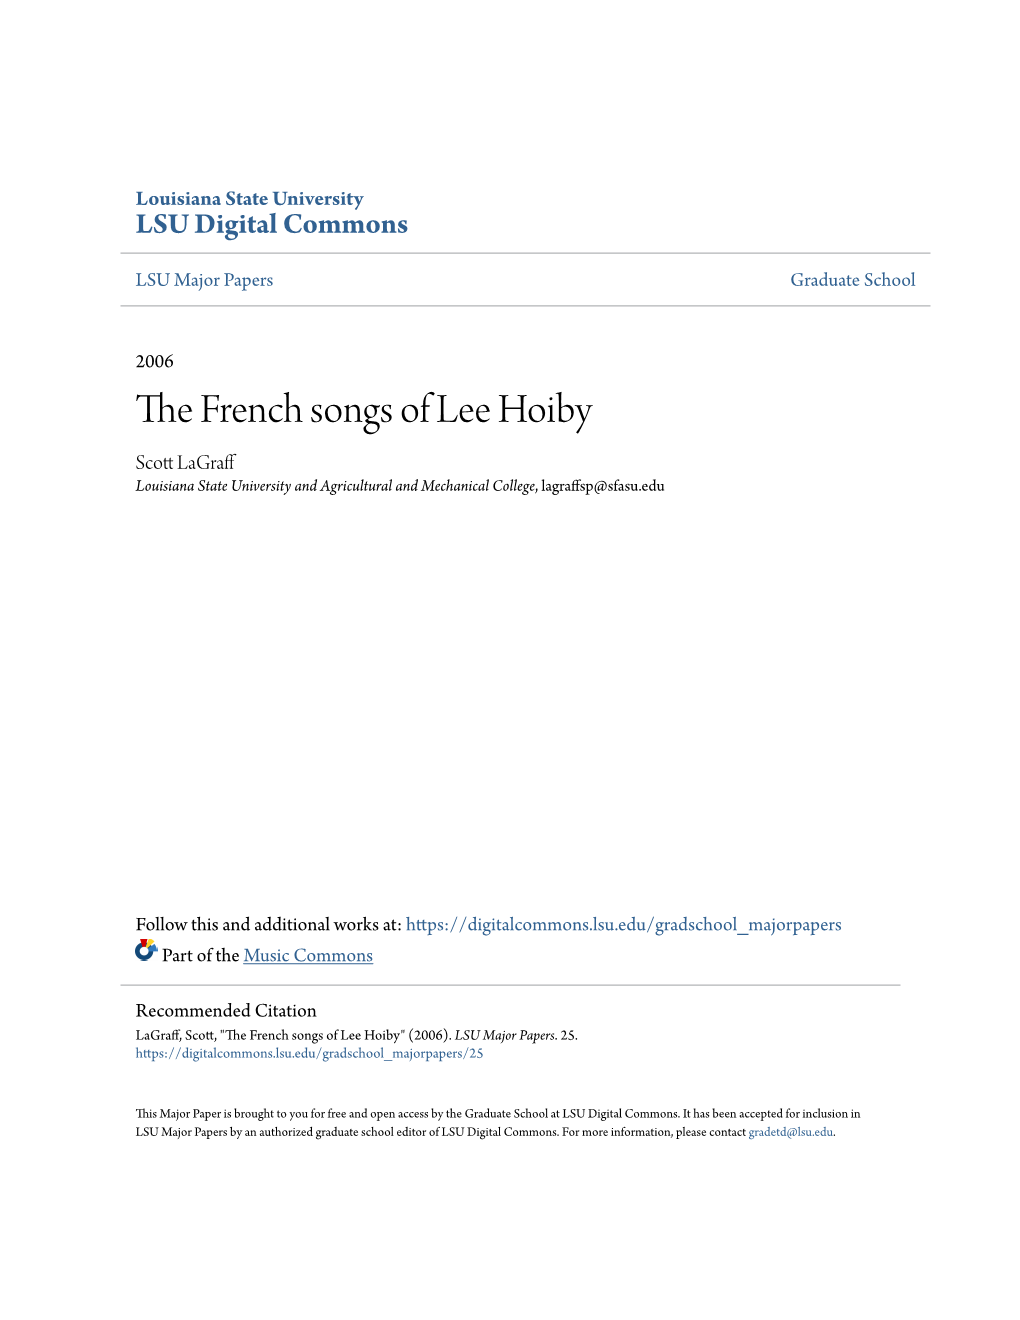 The French Songs of Lee Hoiby